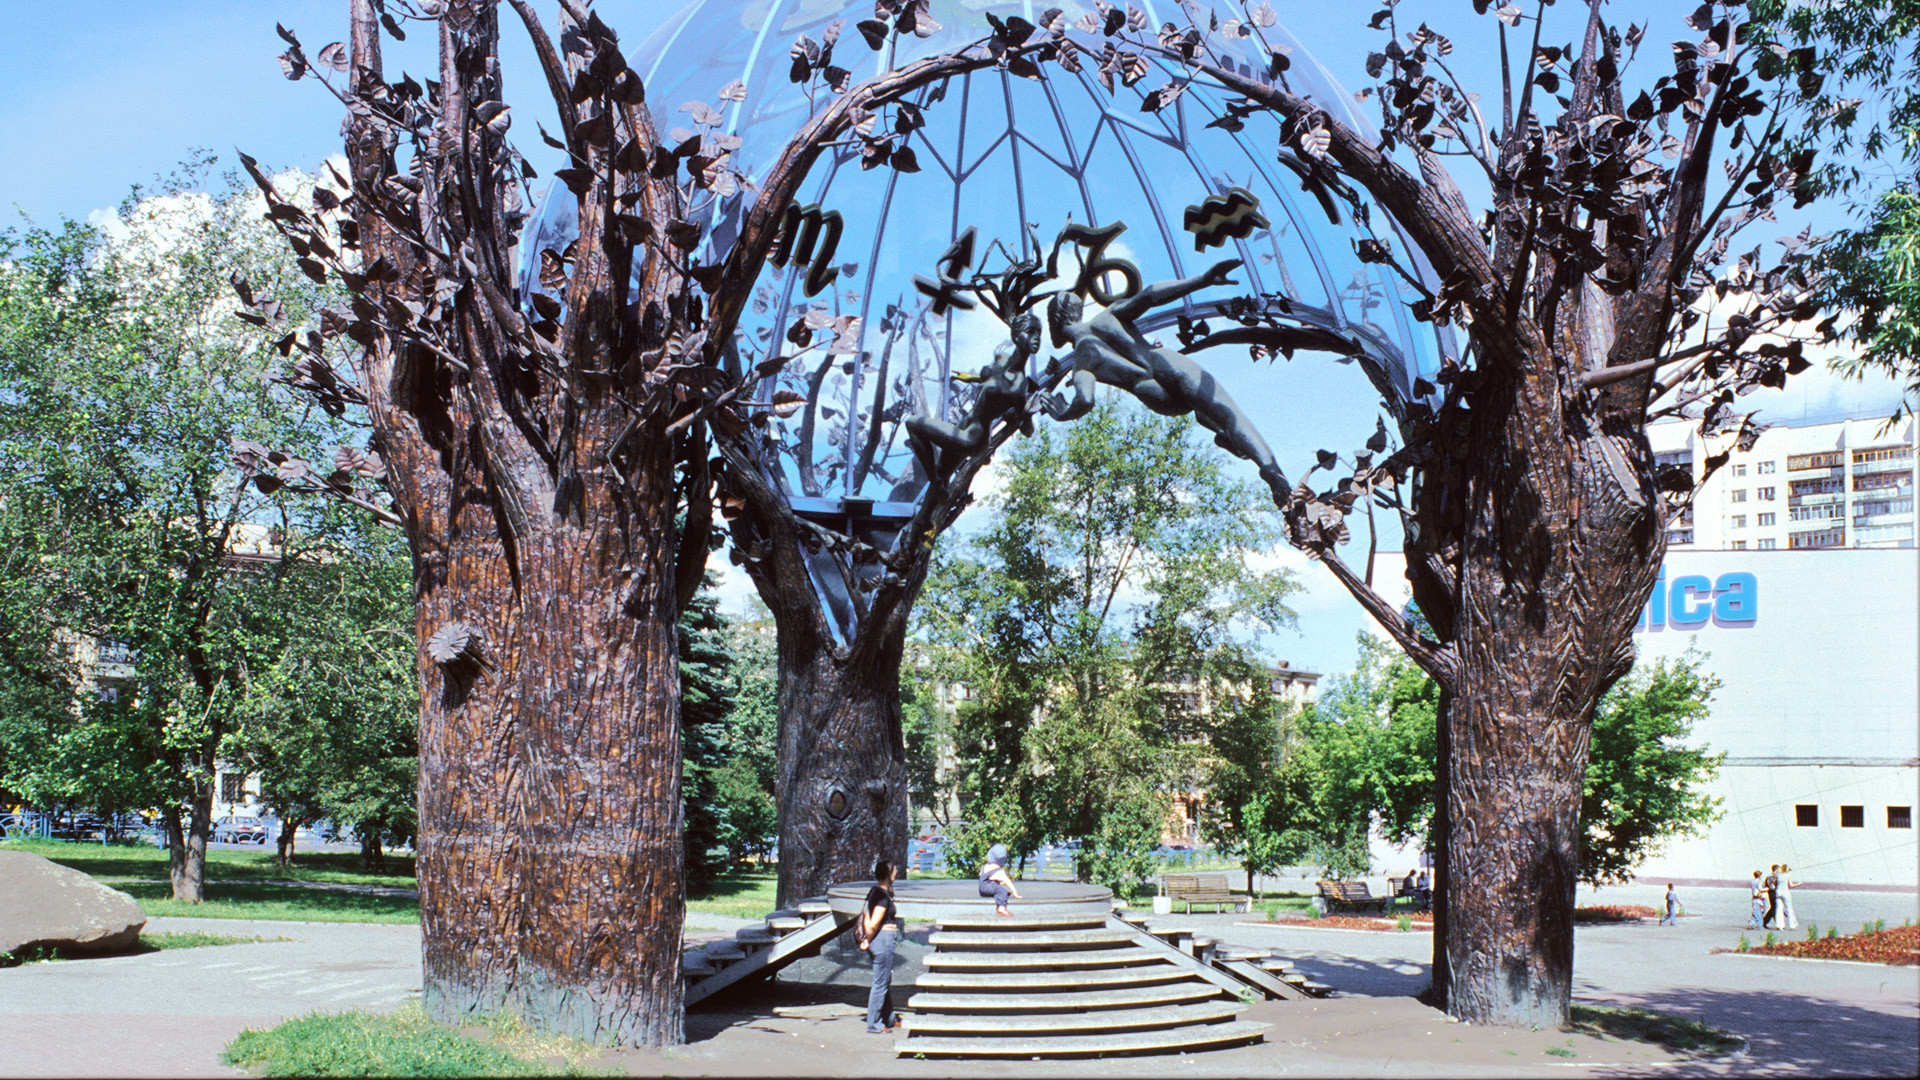 Chelyabinsk. "Sphere of Love," by Victor Mitroshin. Erected in 2000, this sculpture consists of four bronze trees surrounding two kissing figures under a dome of blue Italian glass. It has become the city's beloved calling card. July 13, 2003.